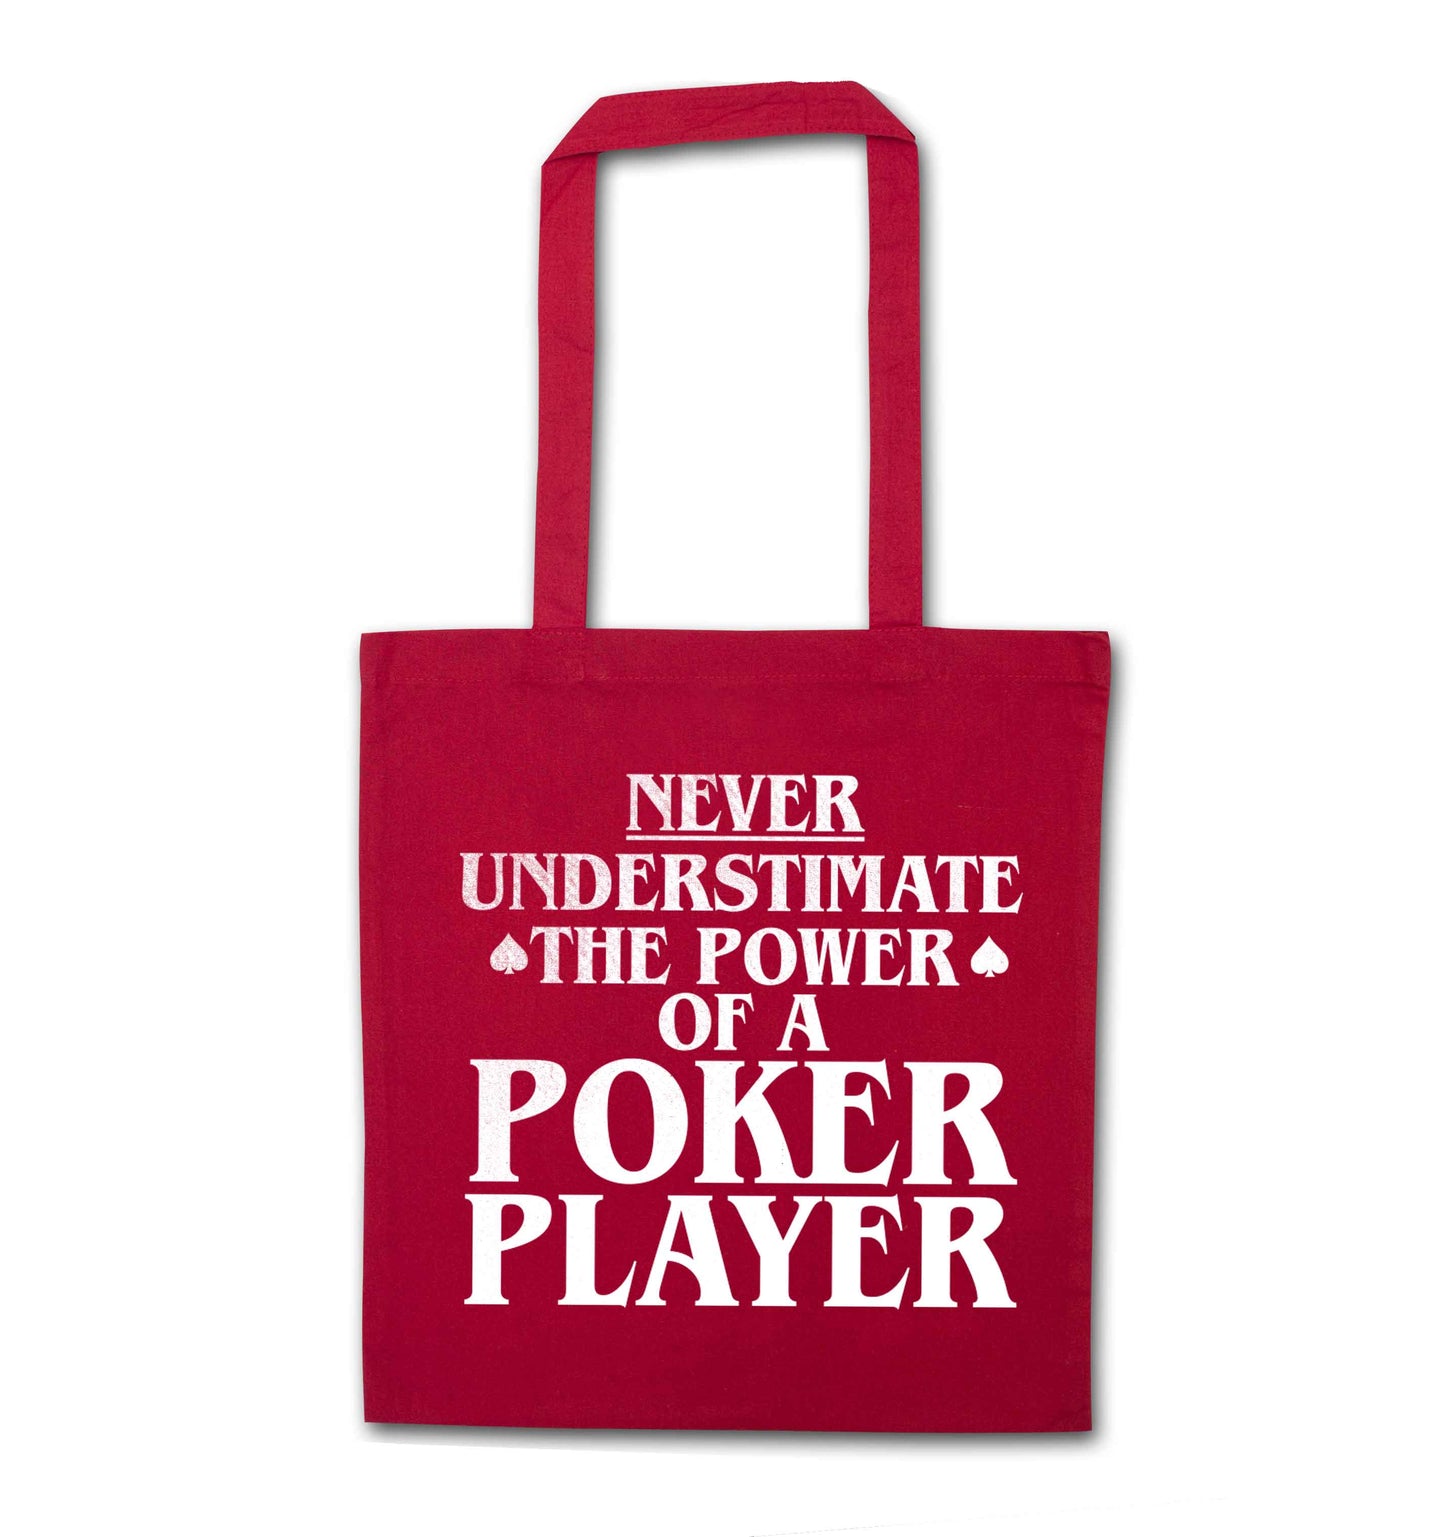 Never understimate the power of a poker player red tote bag